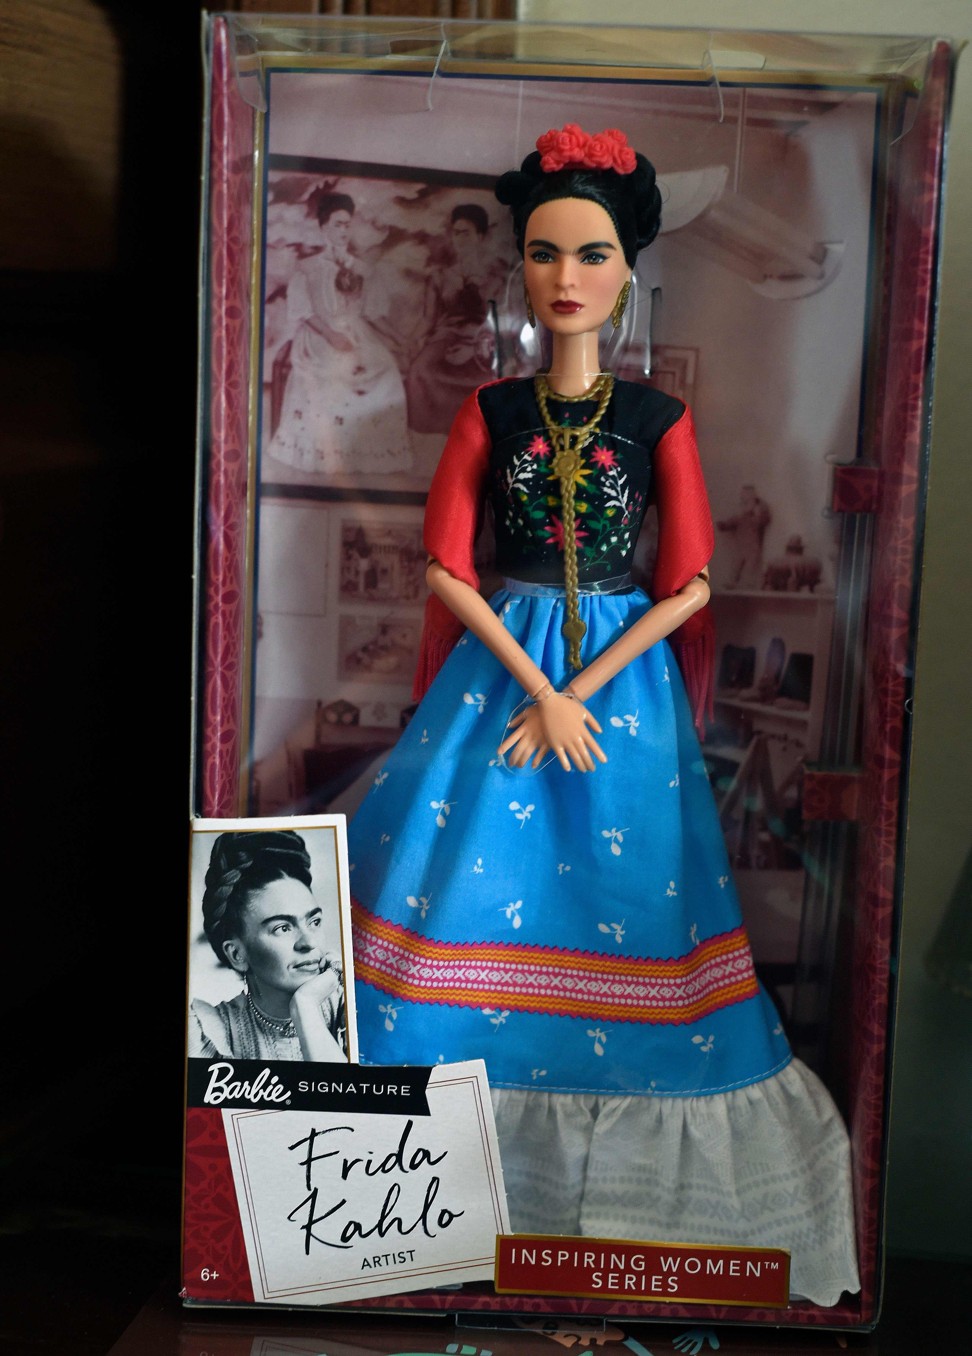 A Barbie doll depicting late Mexican artist Frida Kahlo. Photo: AFP